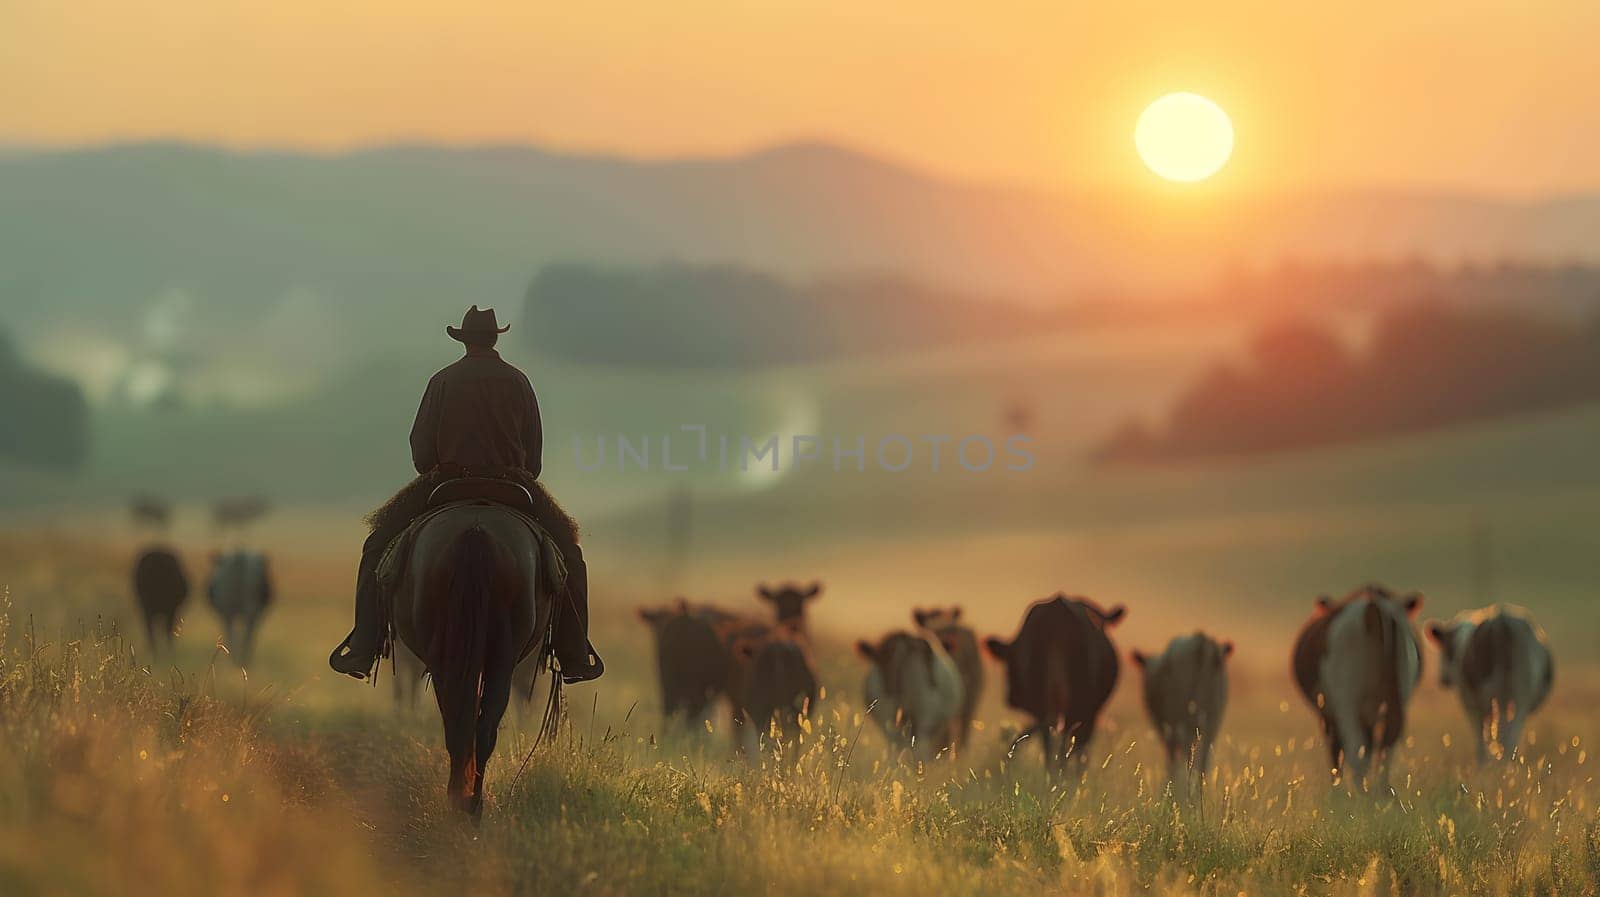 A man on a horse rides in a field with cows under the morning sky by Nadtochiy